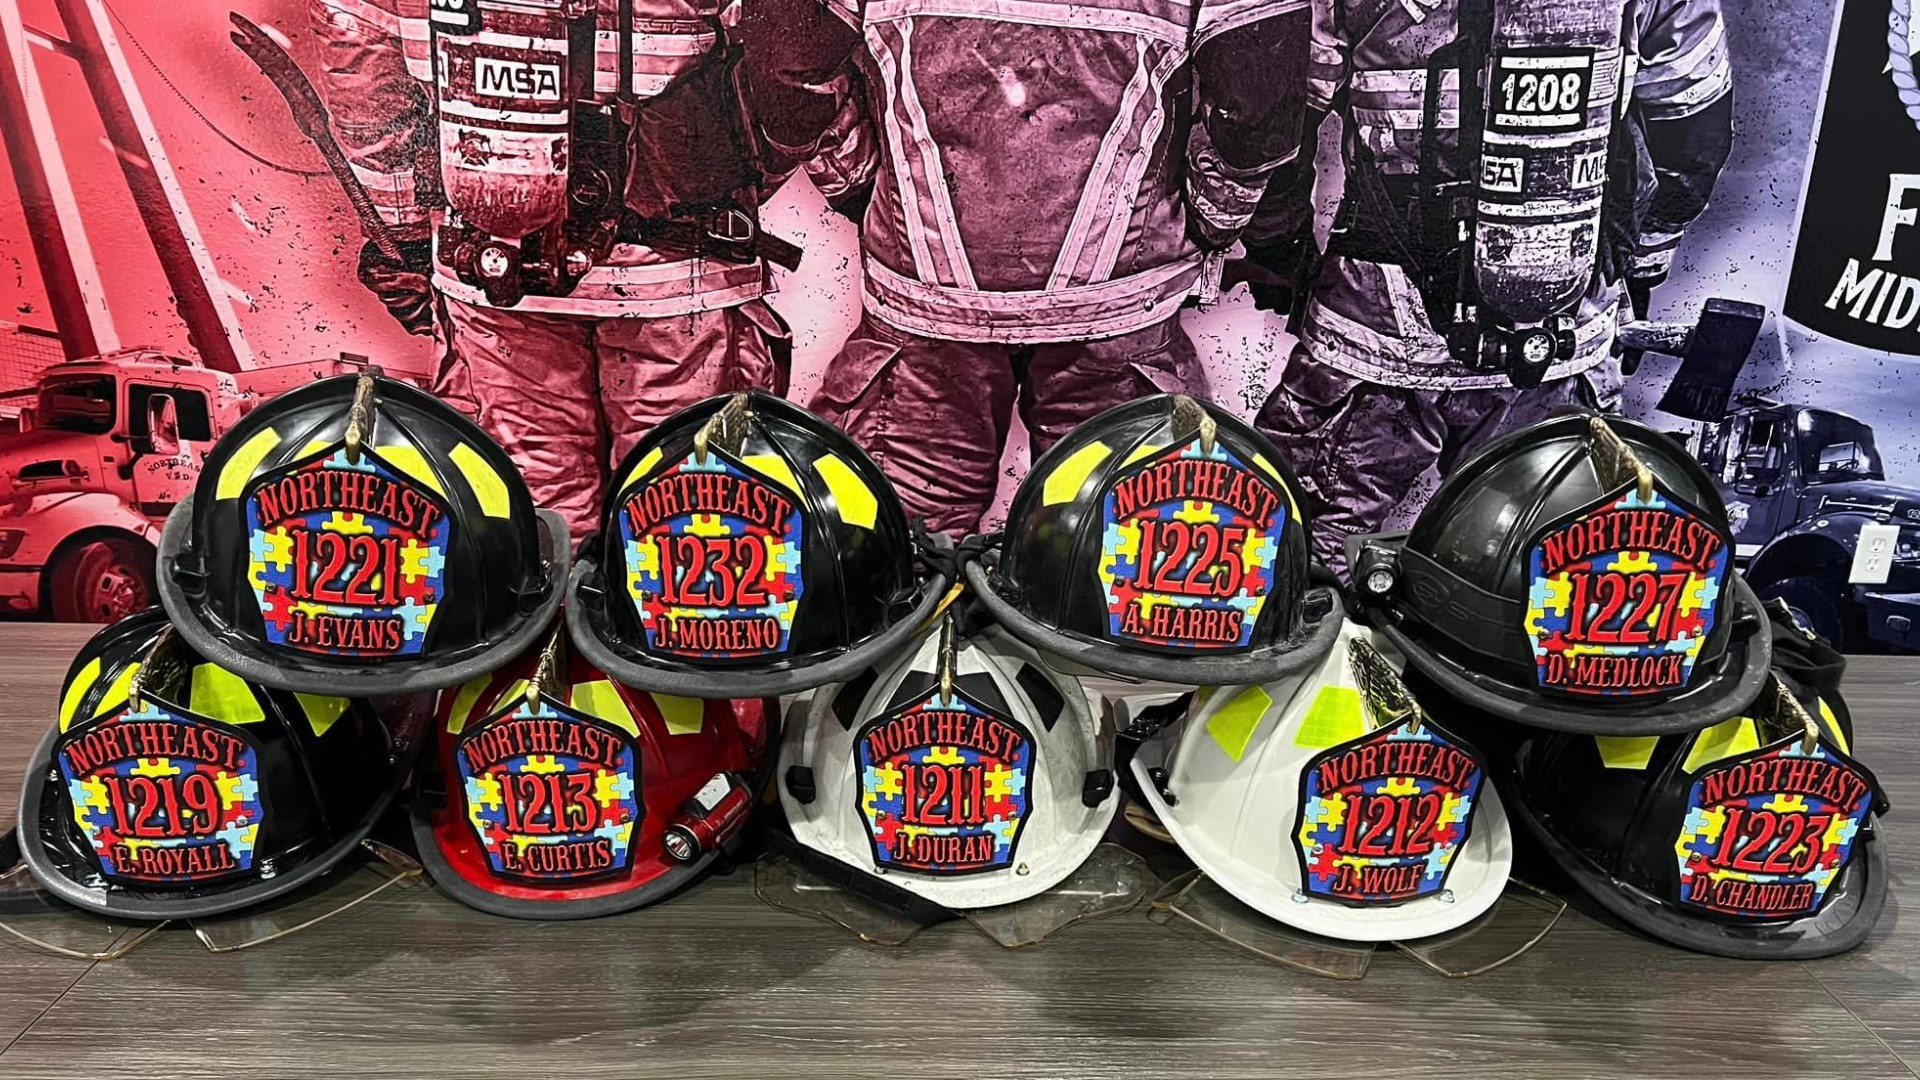 The Midland County Northeast VFD are sporting helmets with the autism puzzle design. This is because several of their kids as well as one of their own has autism.